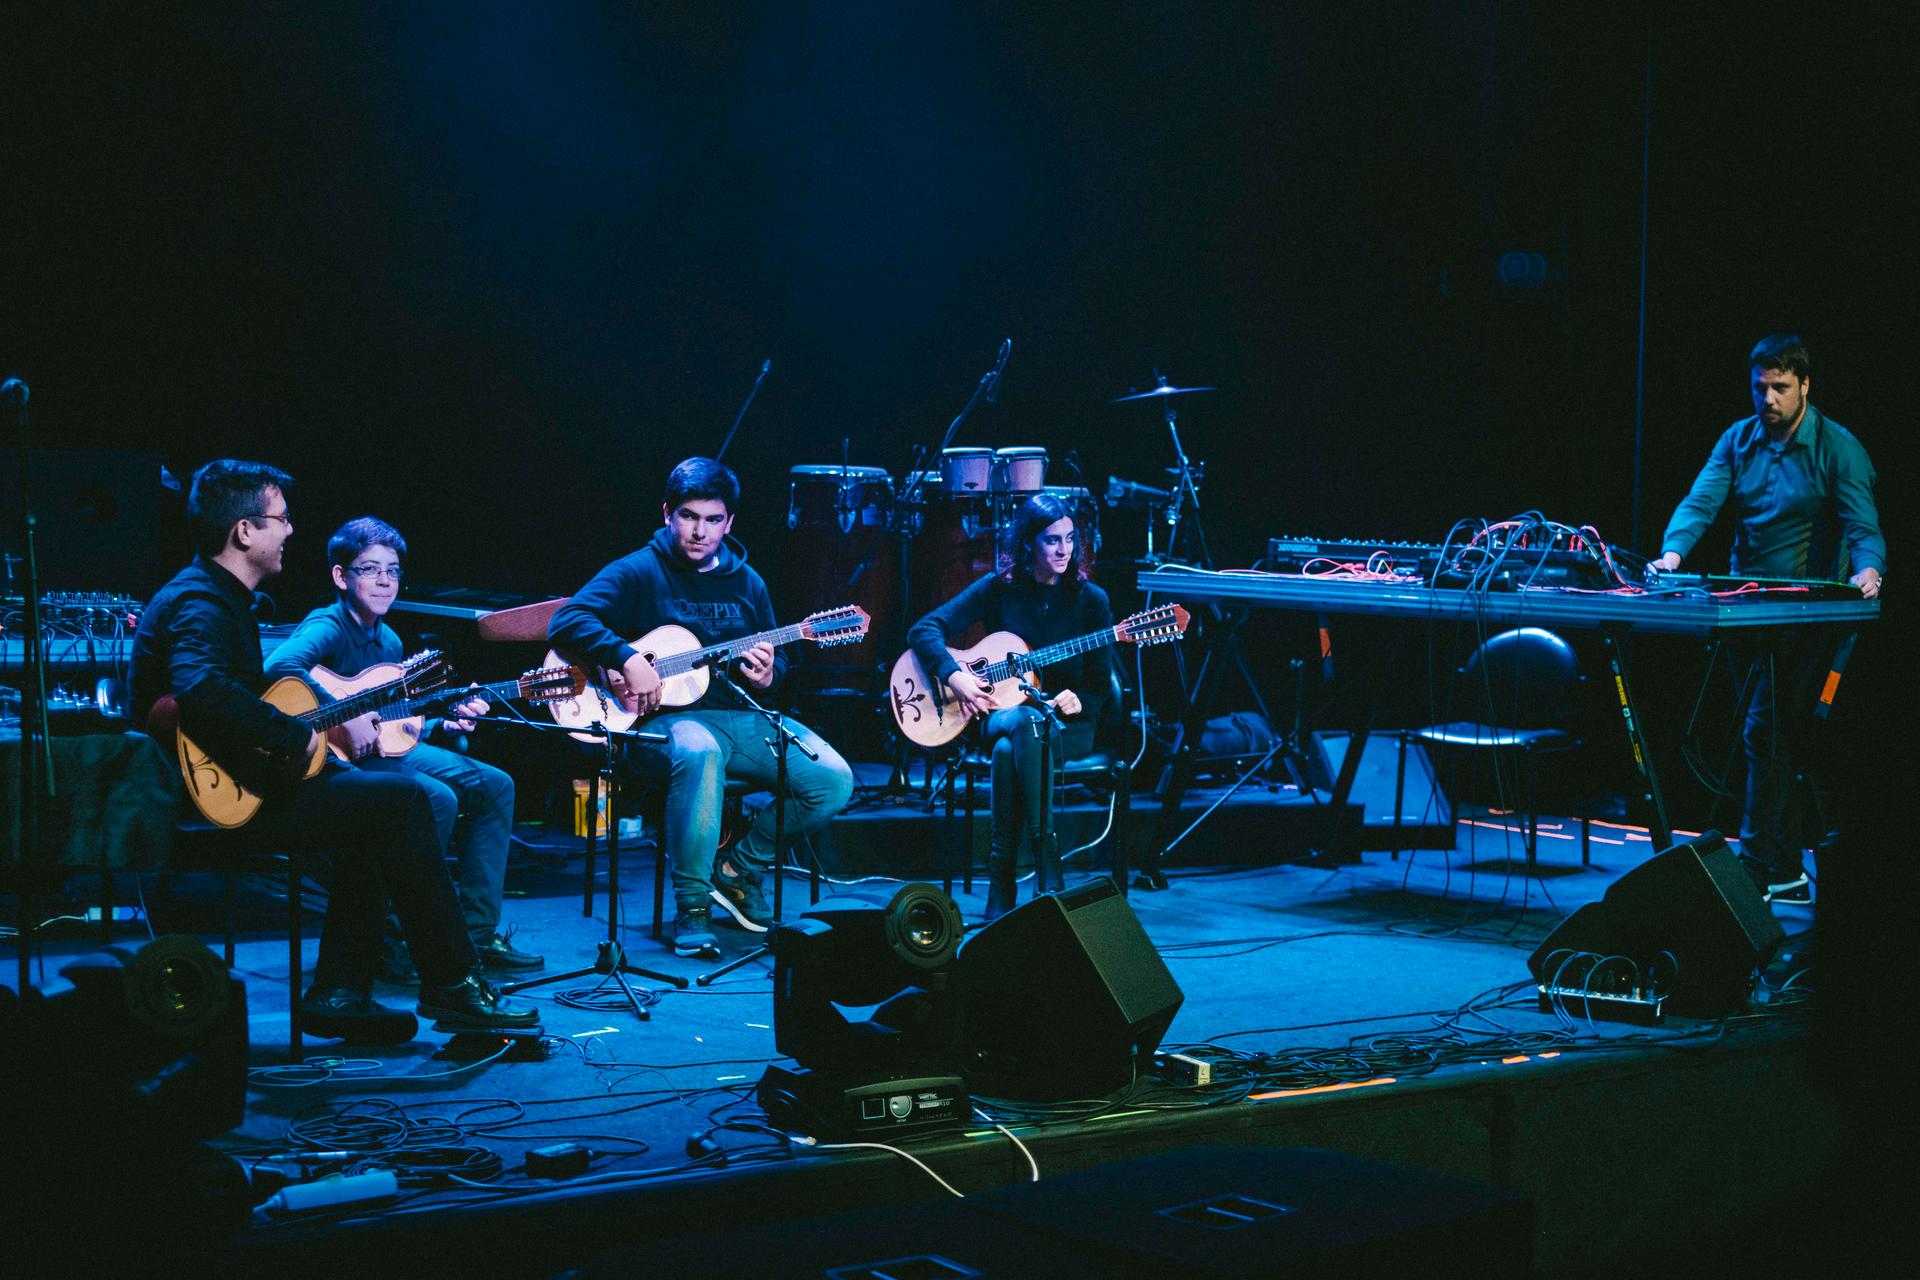 Musicians sit on a stage in blue lighting